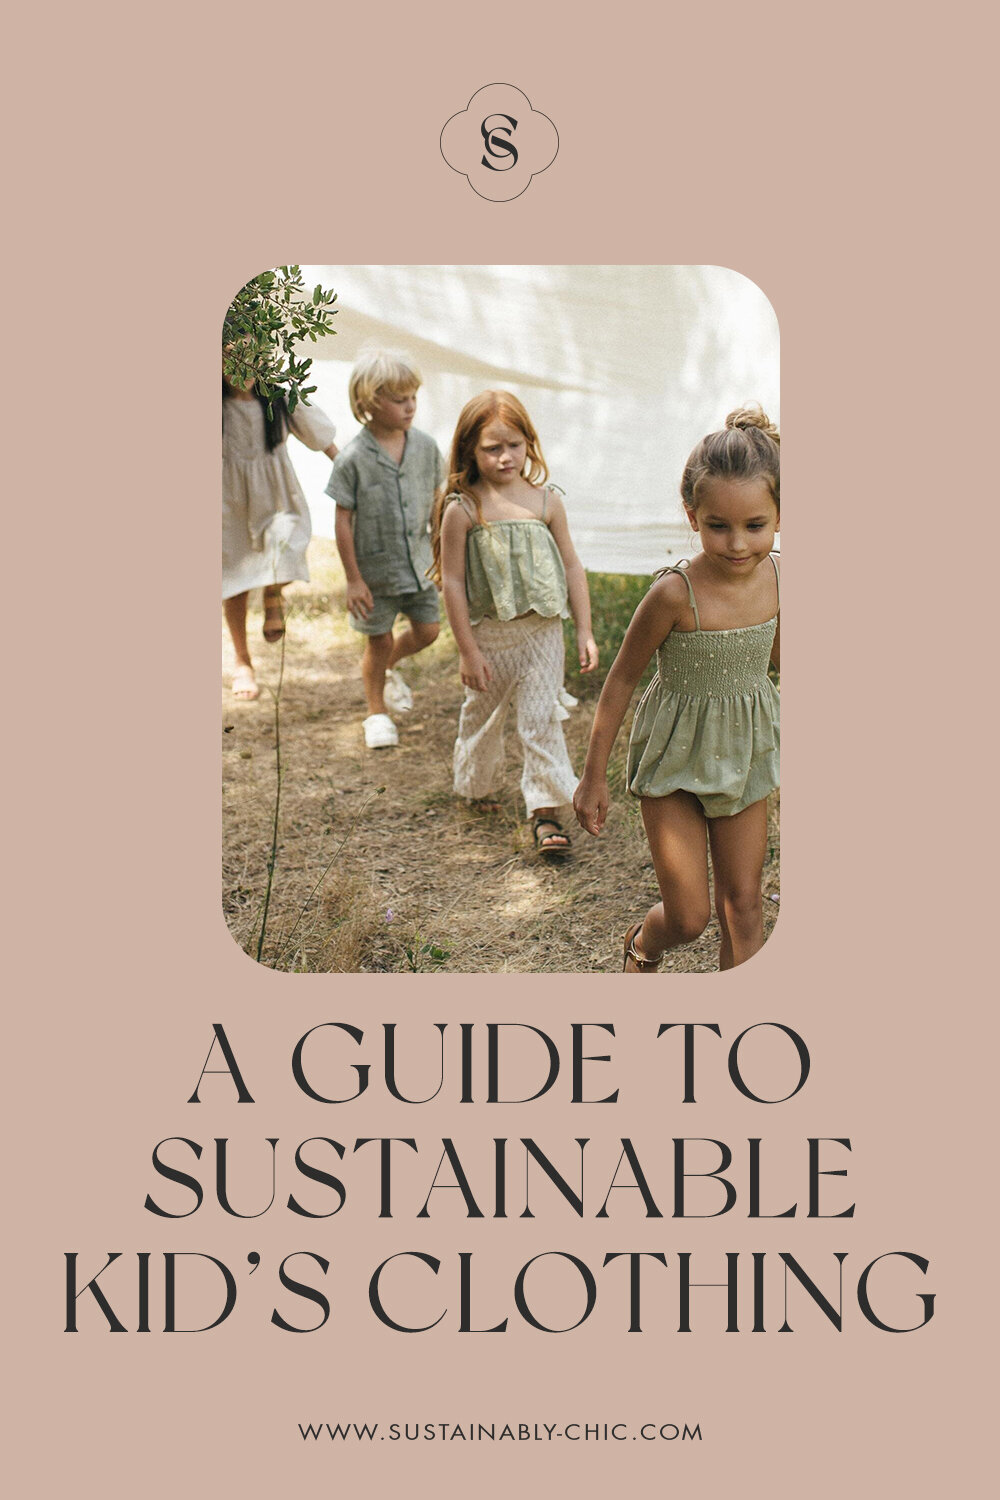 Sustainably Chic | Sustainable Fashion & Parenting Blog | The Best Sustainable Clothing Brands for Kids.jpg